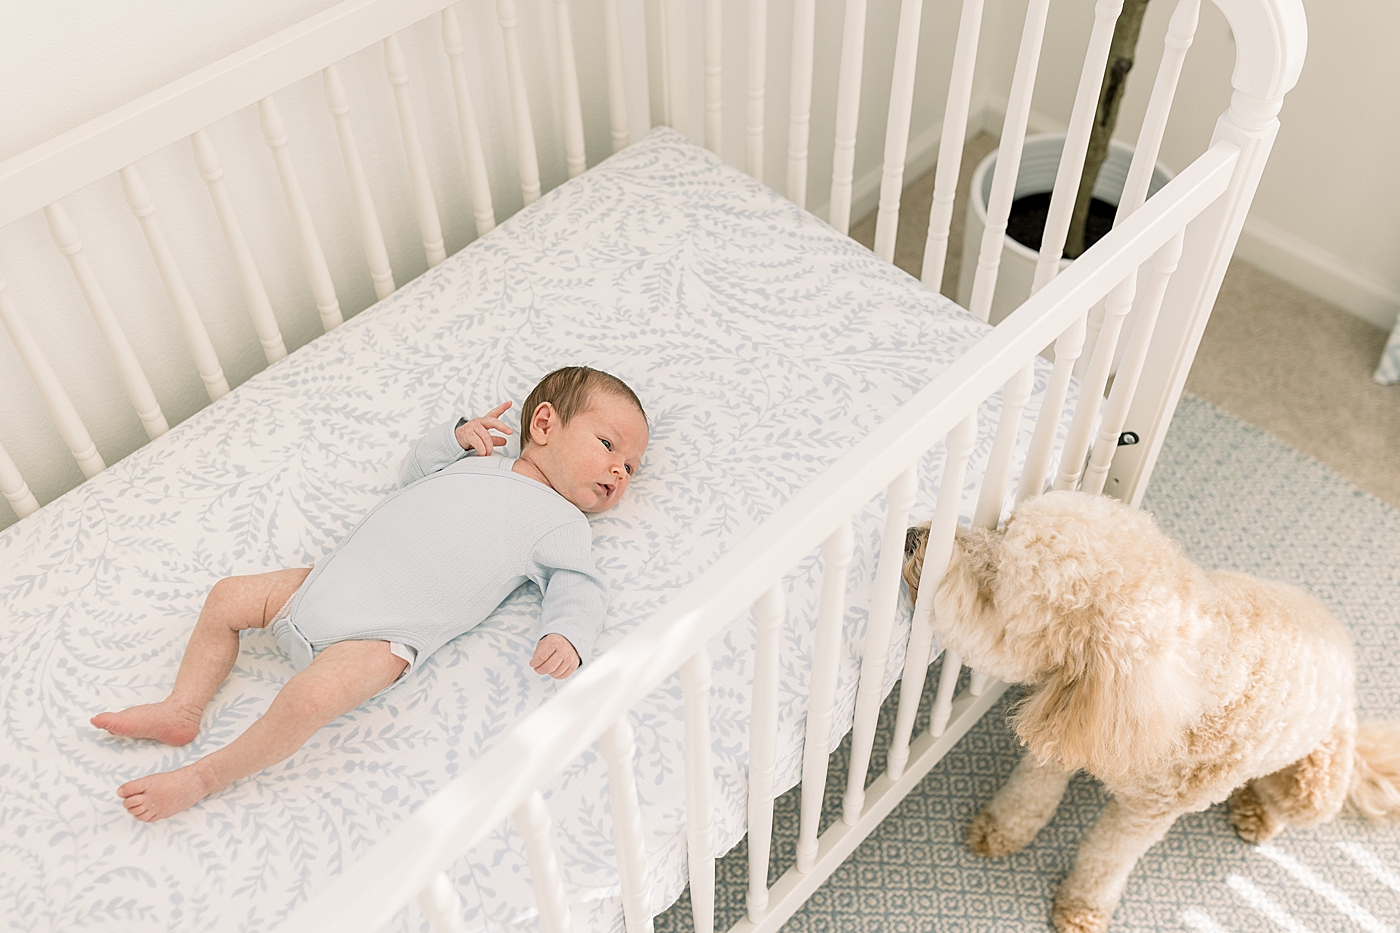 Overhead image of baby in a white crib with family dog peeking in | Image by Caitlyn Motycka Photography